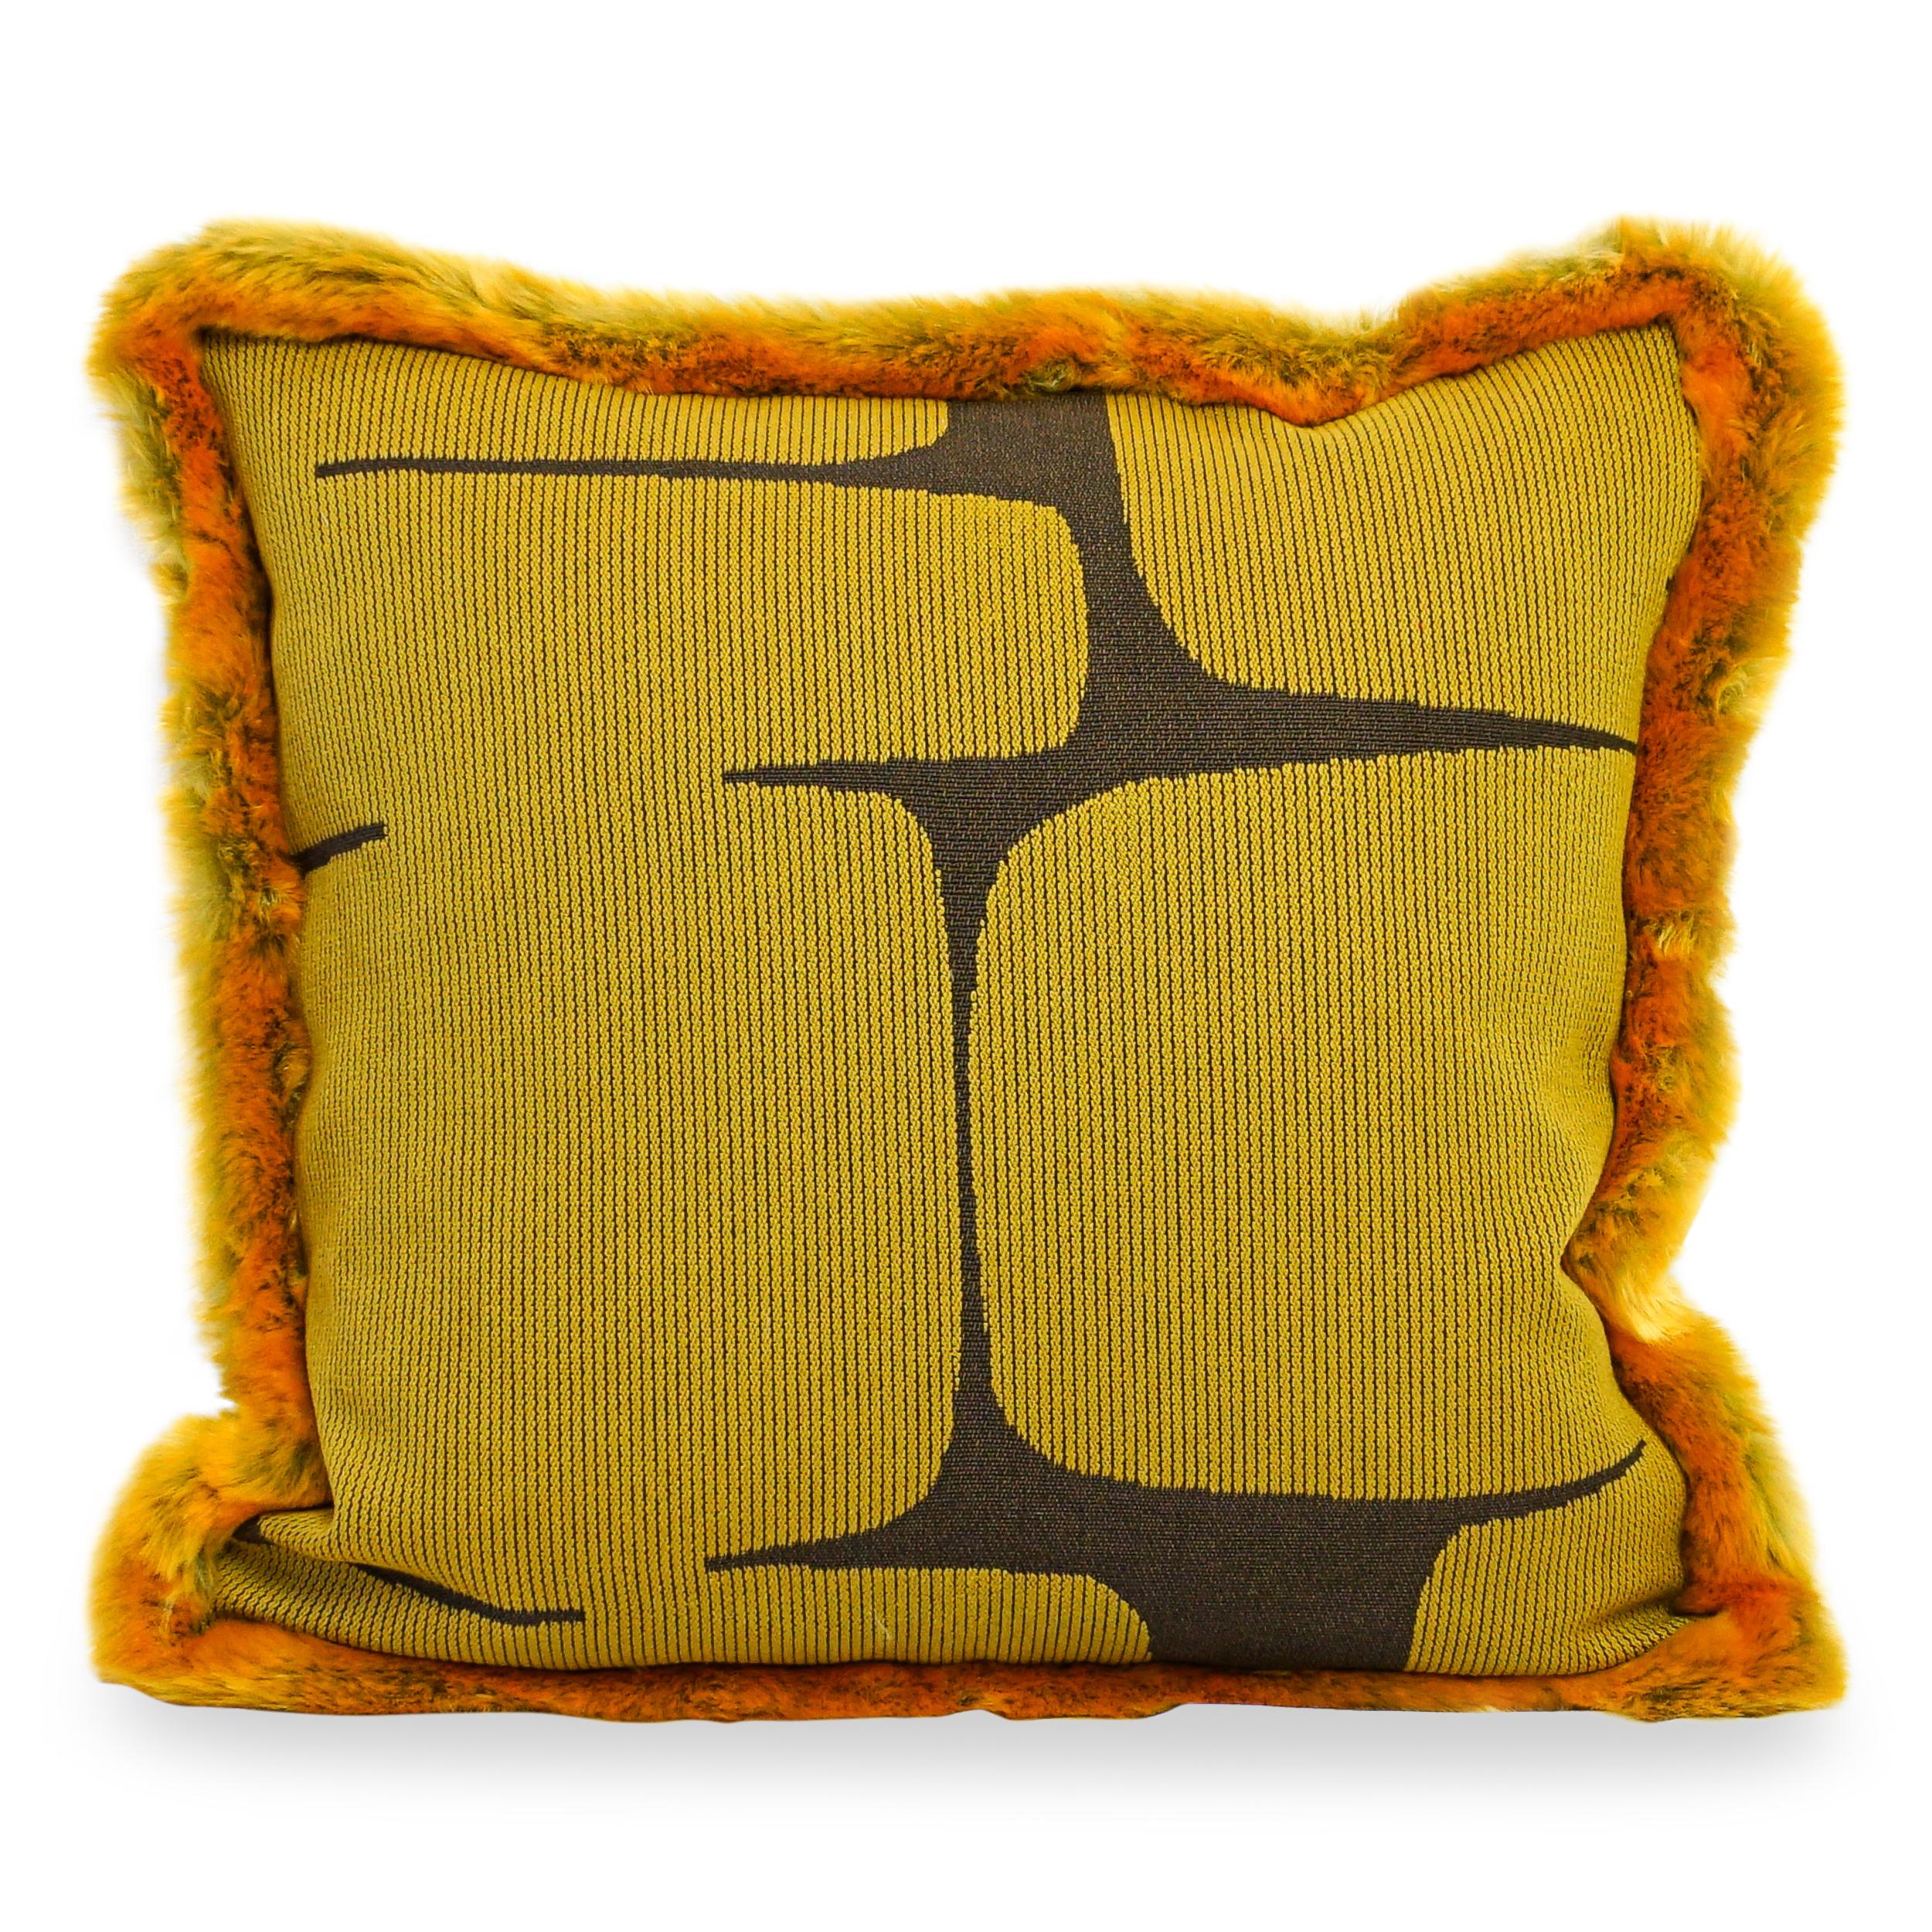 A set of throw pillows with gold and brown face, gold velvet back and golden faux fur trim. Down/feather insert and invisible zipper.

Measurements:
Overall: 20”W x 20”H

Price As Shown: $1,640 as a pair
Customization may change price.

How